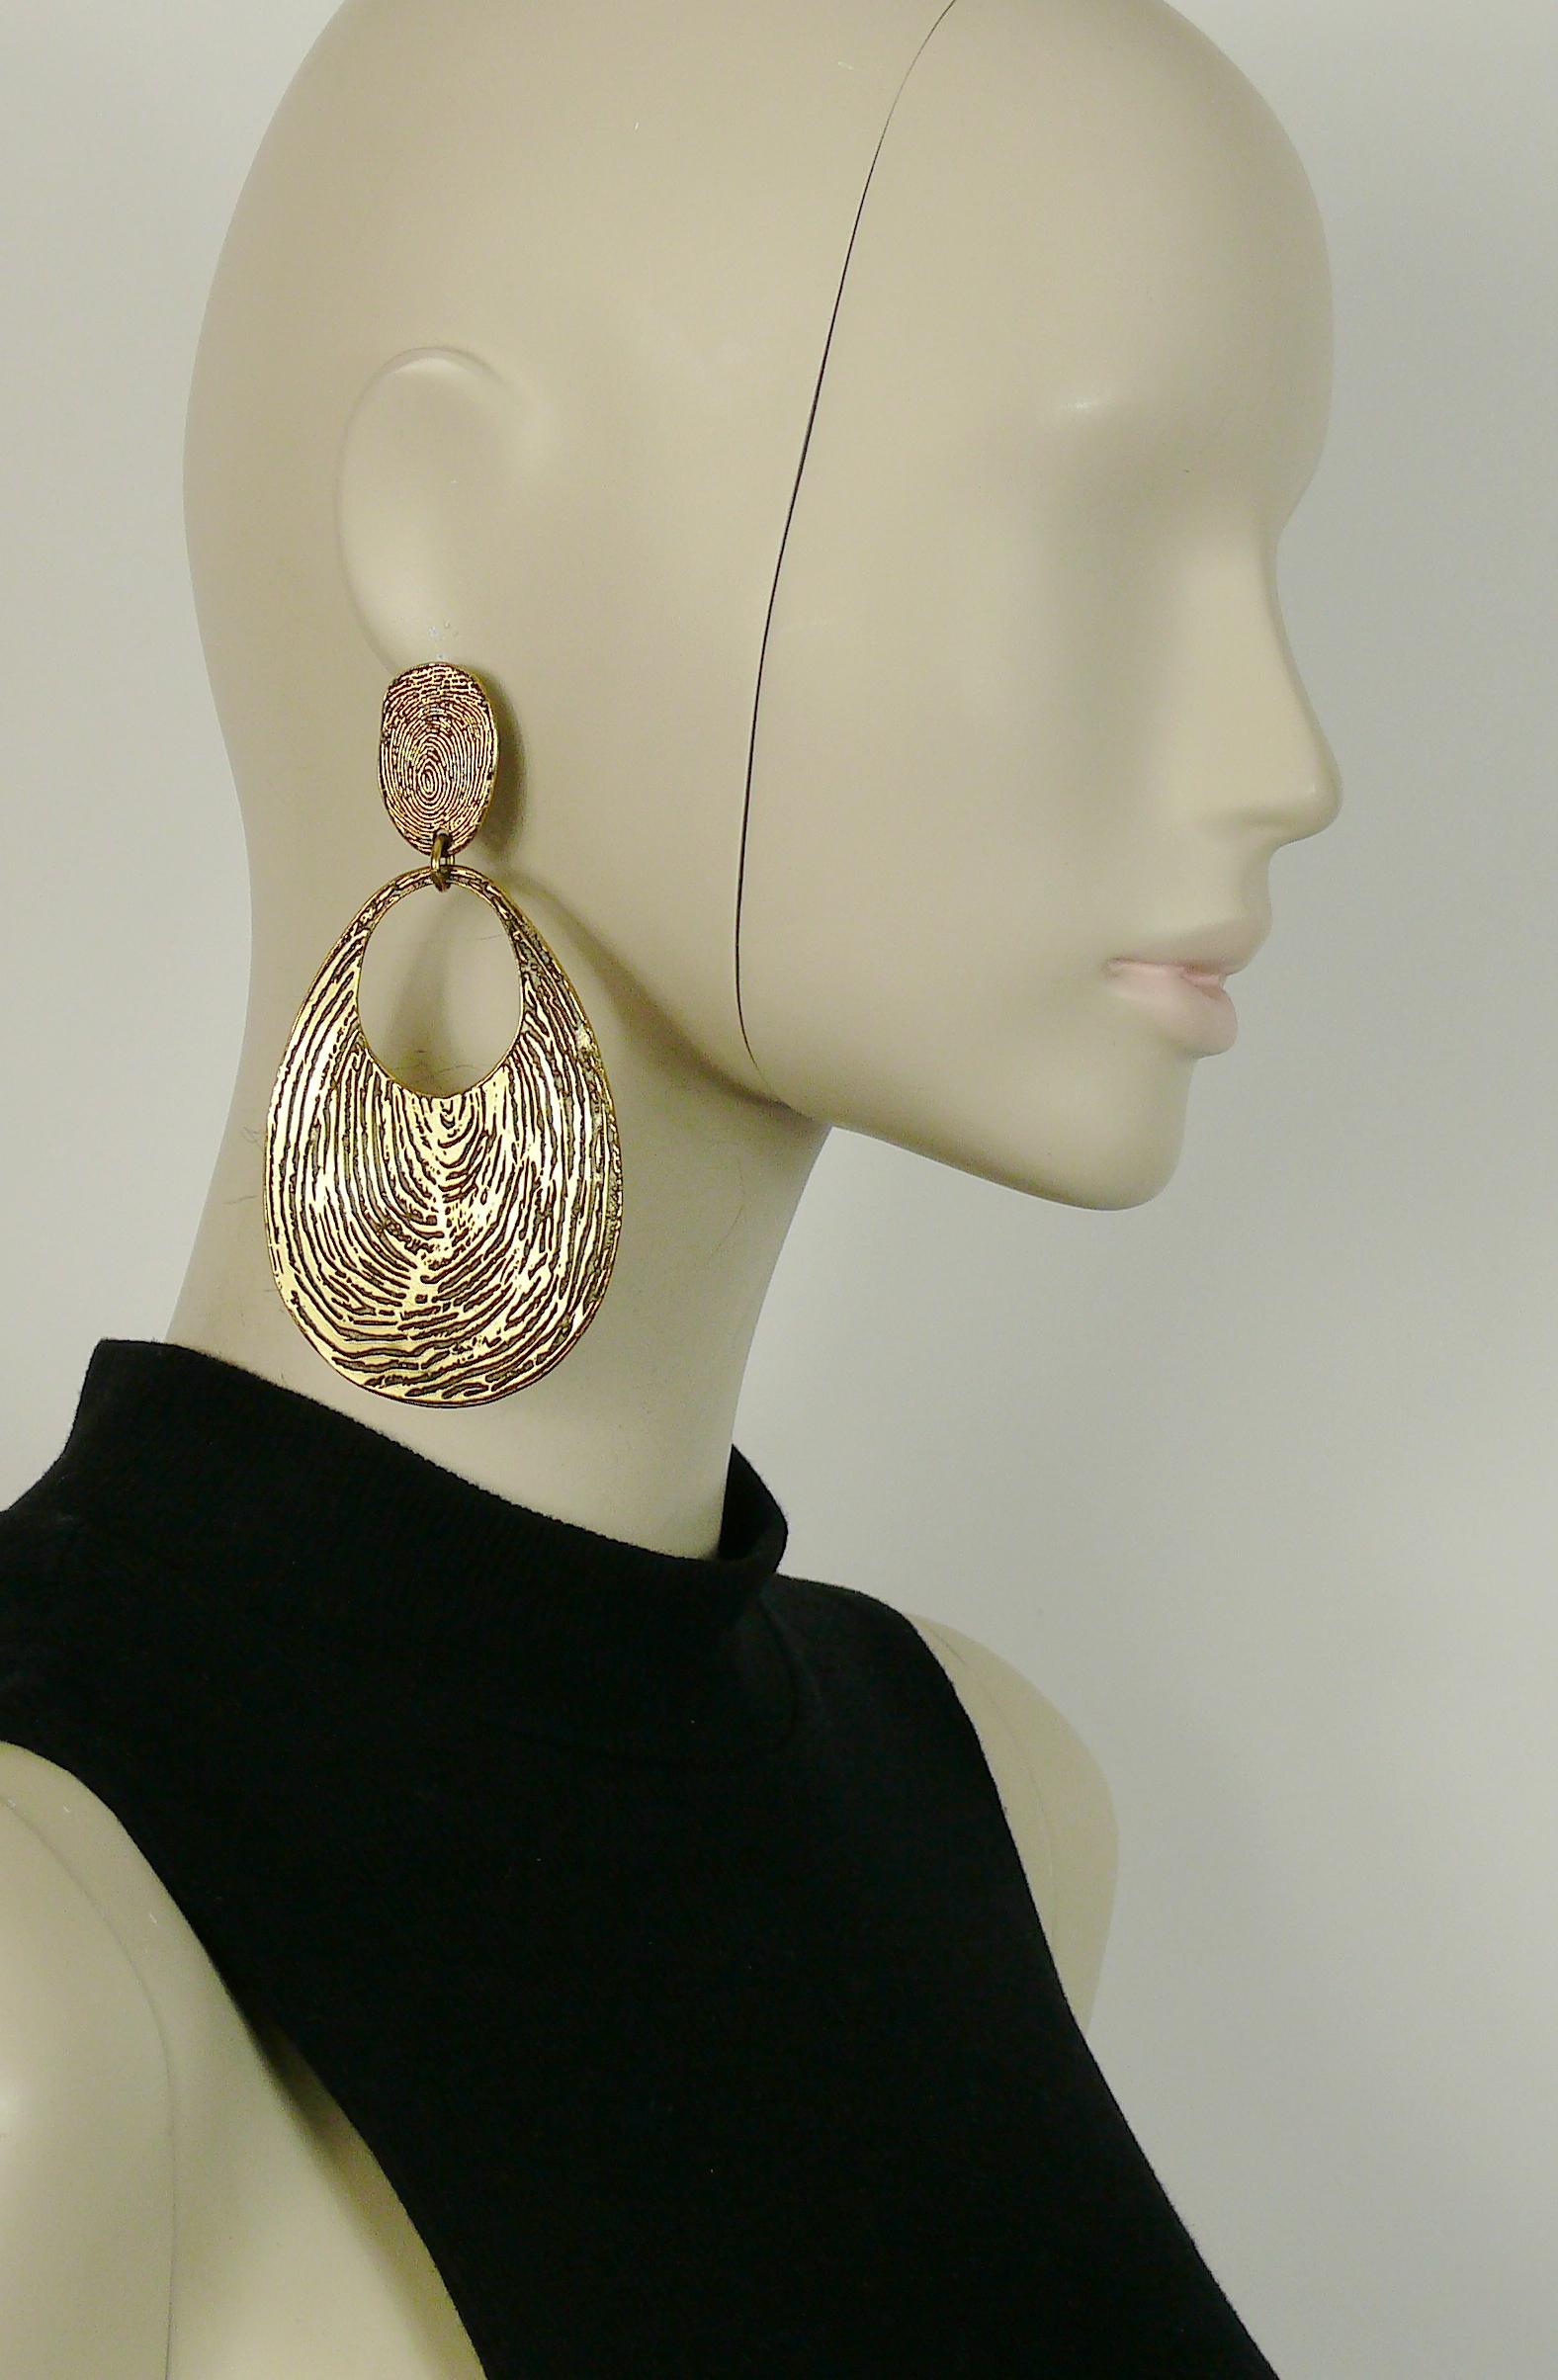 YVES SAINT LAURENT massive antiqued gold tone dangling earrings (clip-on) featuring a fingerprint design in bold relief.

YVES SAINT LAURENT 2011 Spring/Summer collection by STEFANO PILATI.

Embossed YVES SAINT LAURENT.

Indicative measurements :